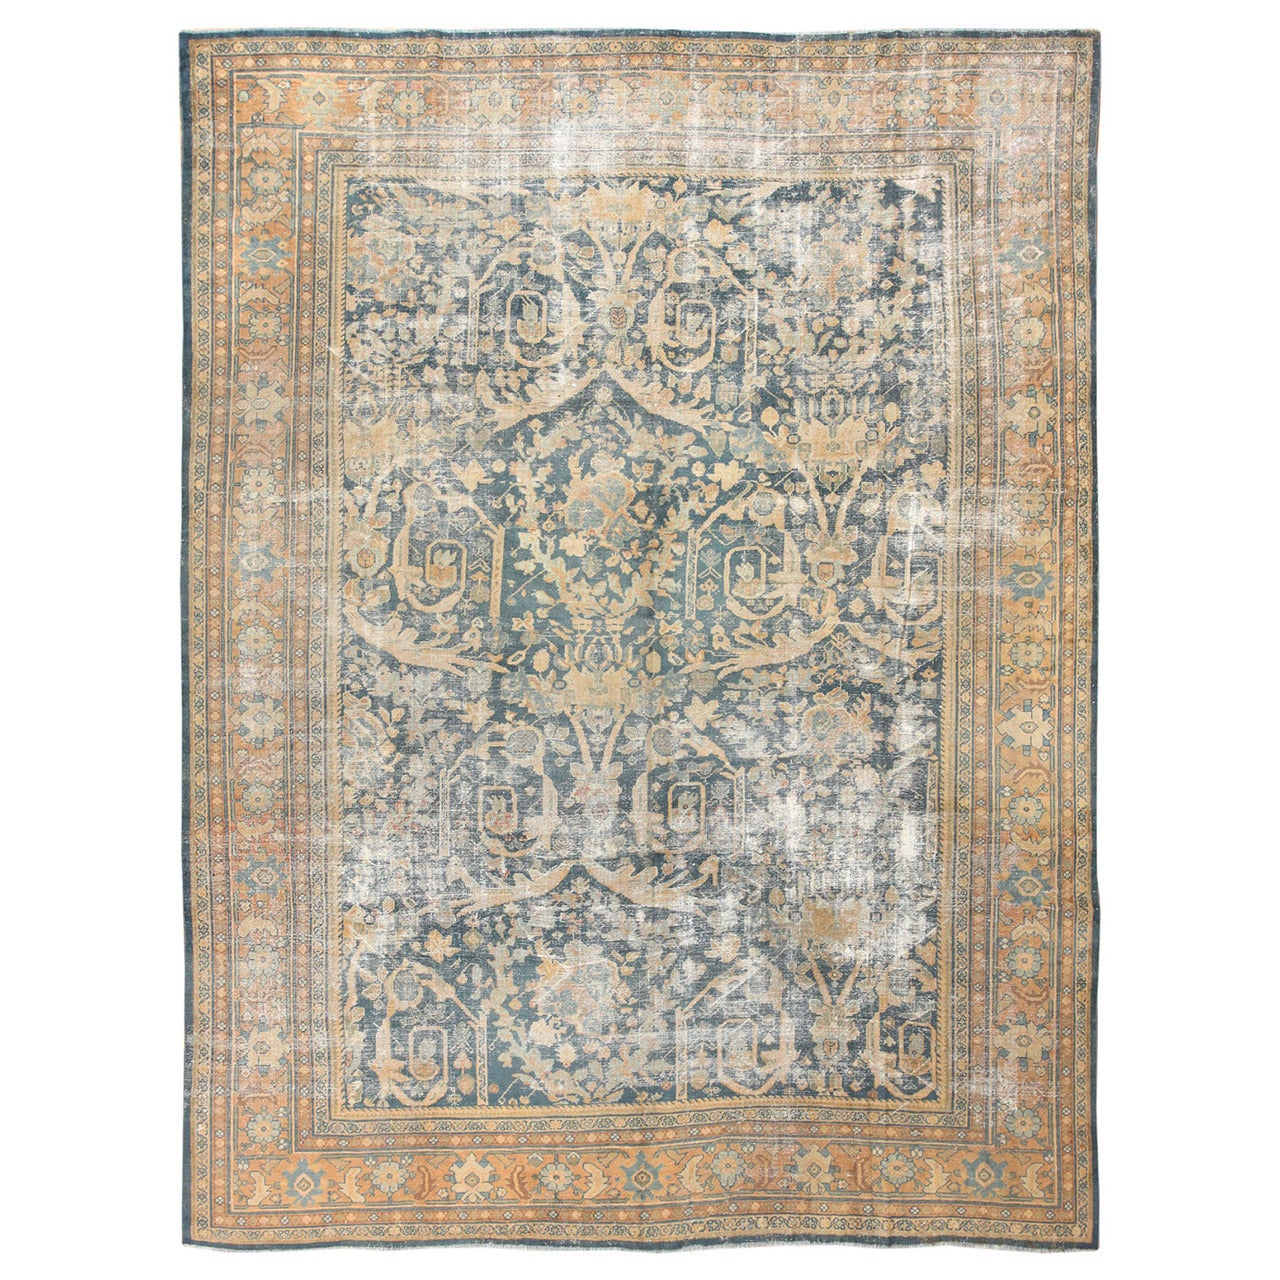 Antique “Shabby Chic” Persian Sultanabad Rug